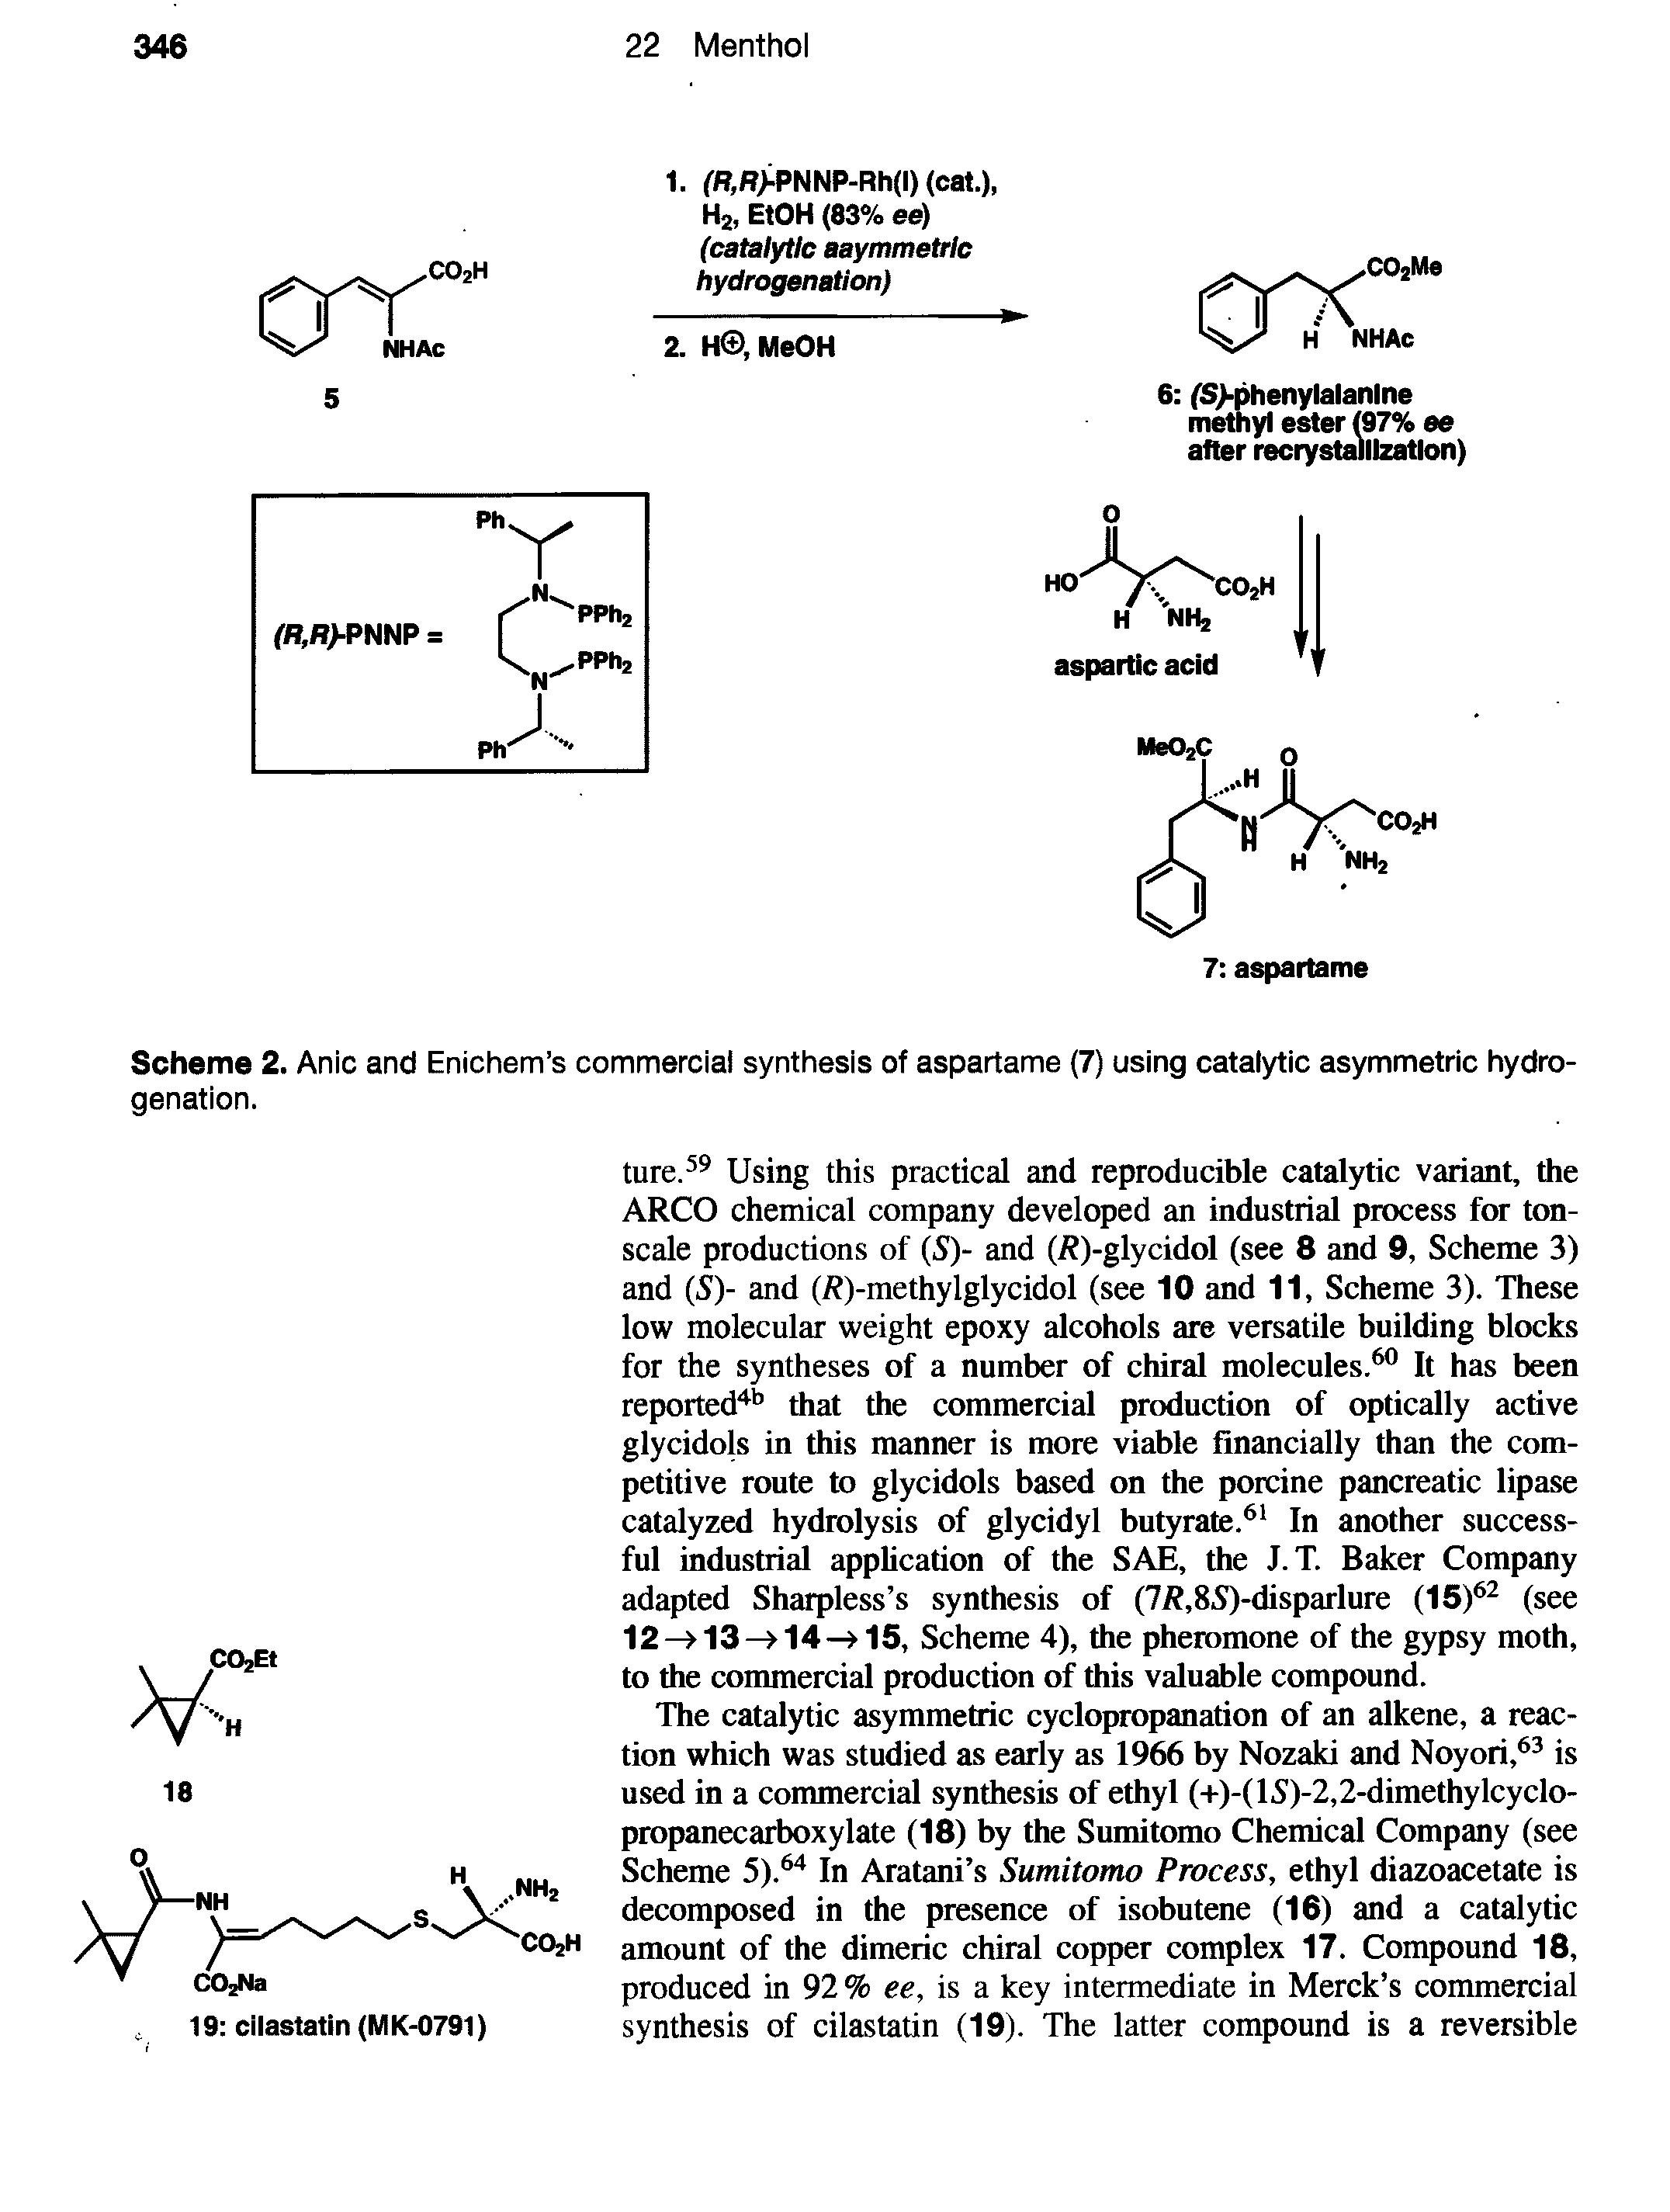 Scheme 2. Anic and Enichem s commercial synthesis of aspartame (7) using catalytic asymmetric hydrogenation.